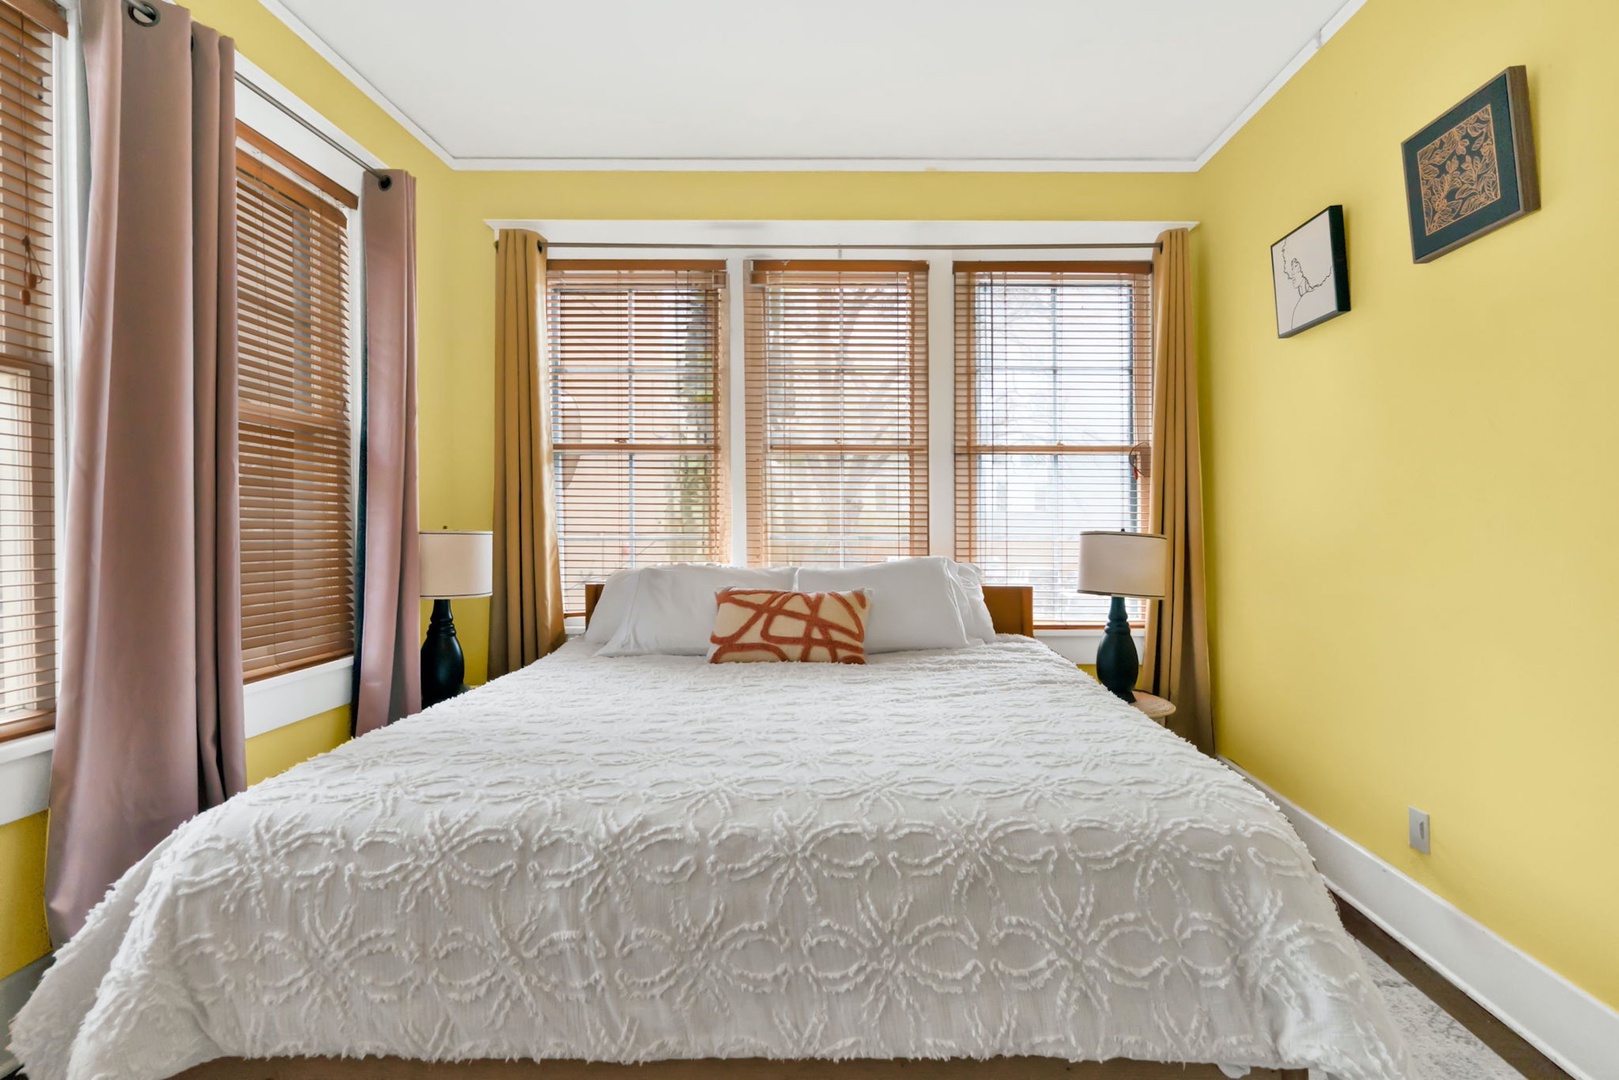 The second bedroom sanctuary features lots of windows & a cozy king bed